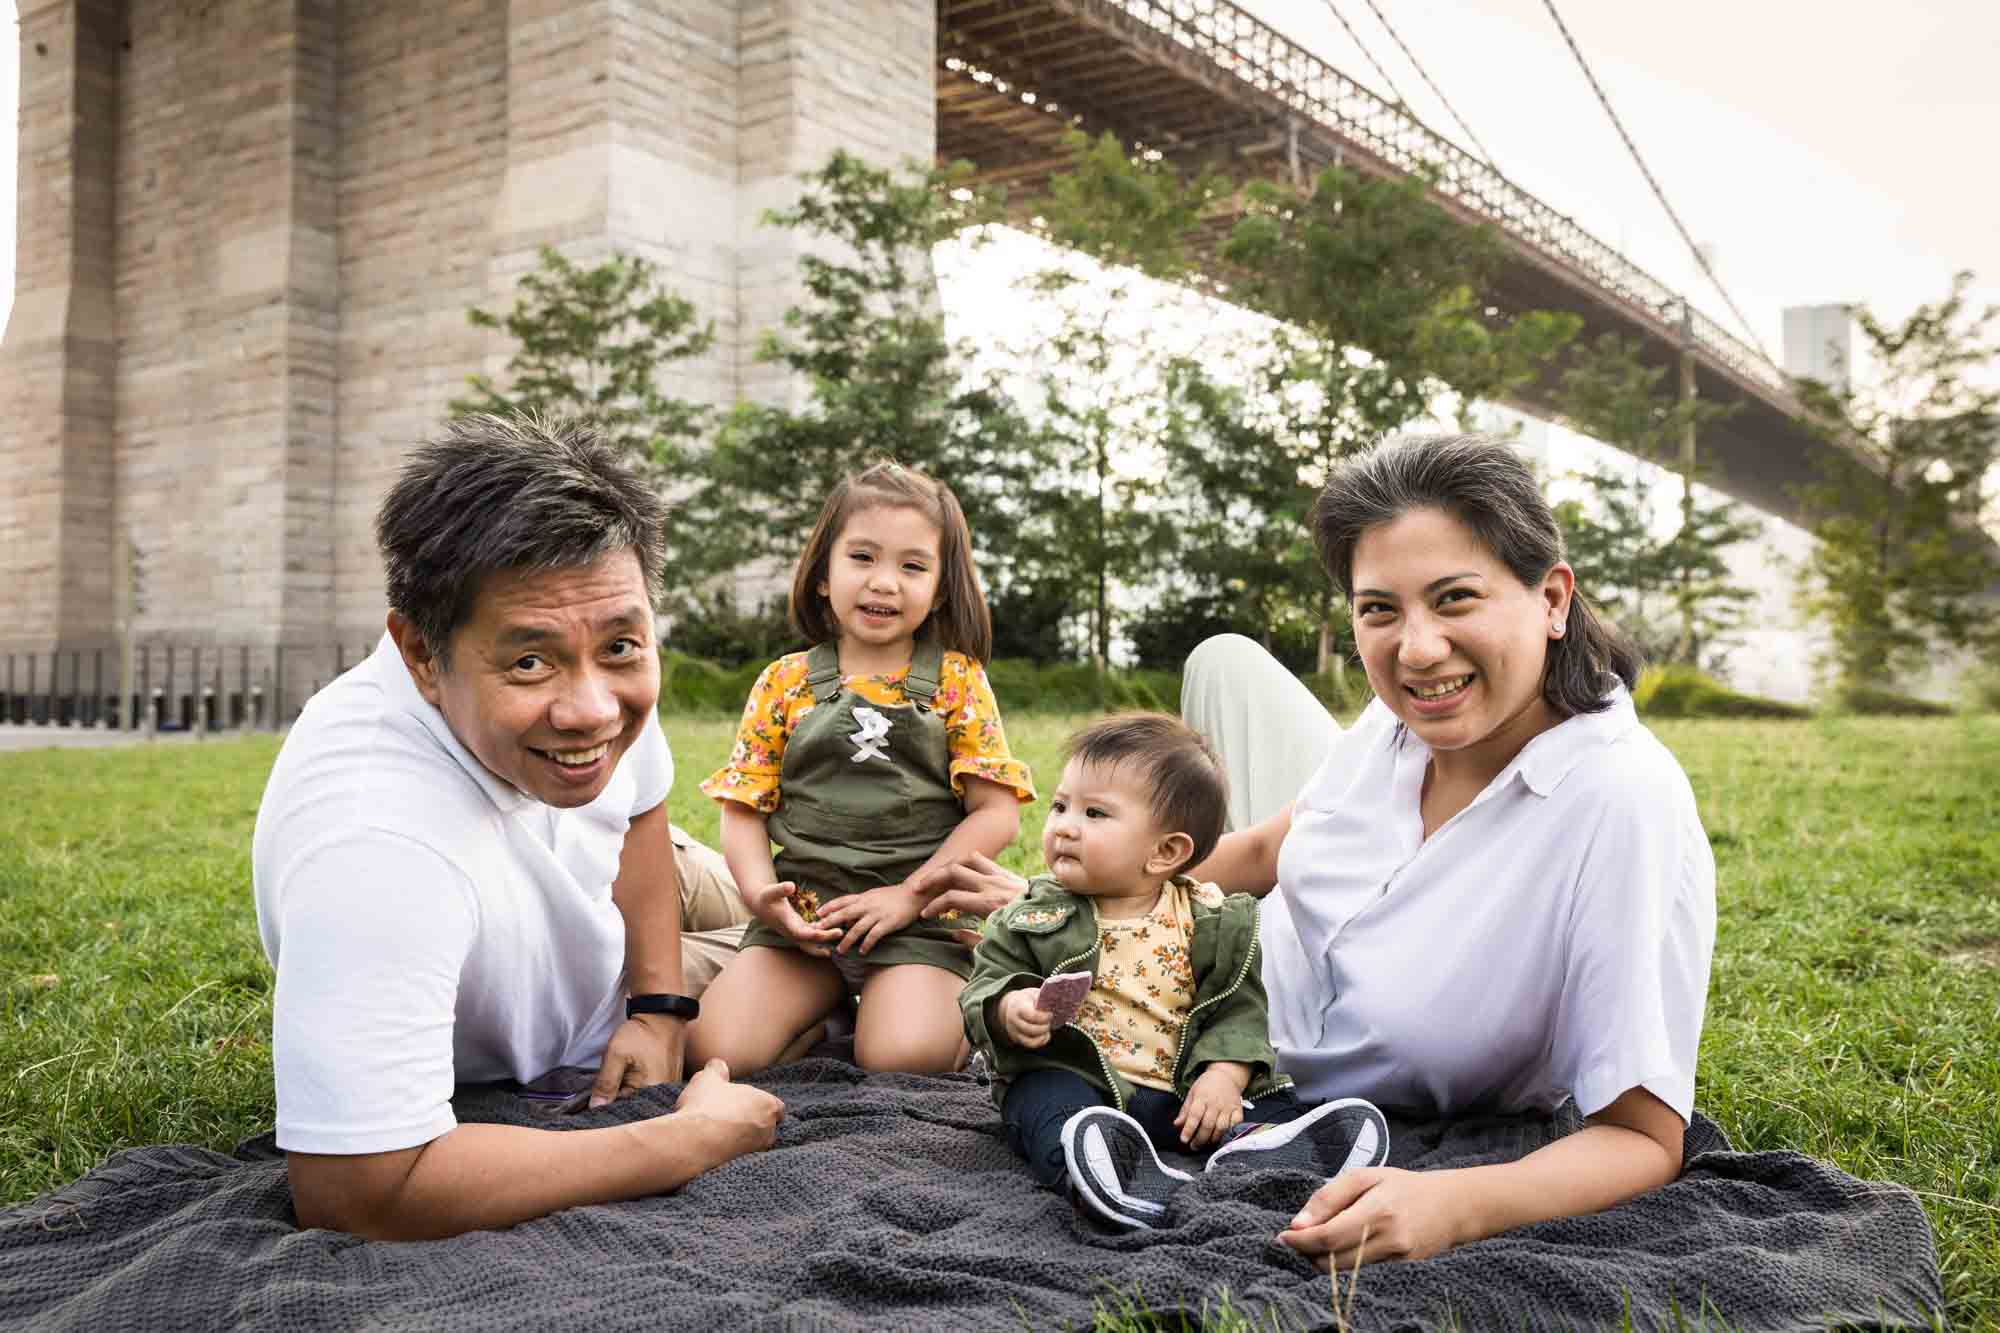 Parents with two young daughters on grey blanket for an article on Brooklyn Bridge Park family portrait tips for young children